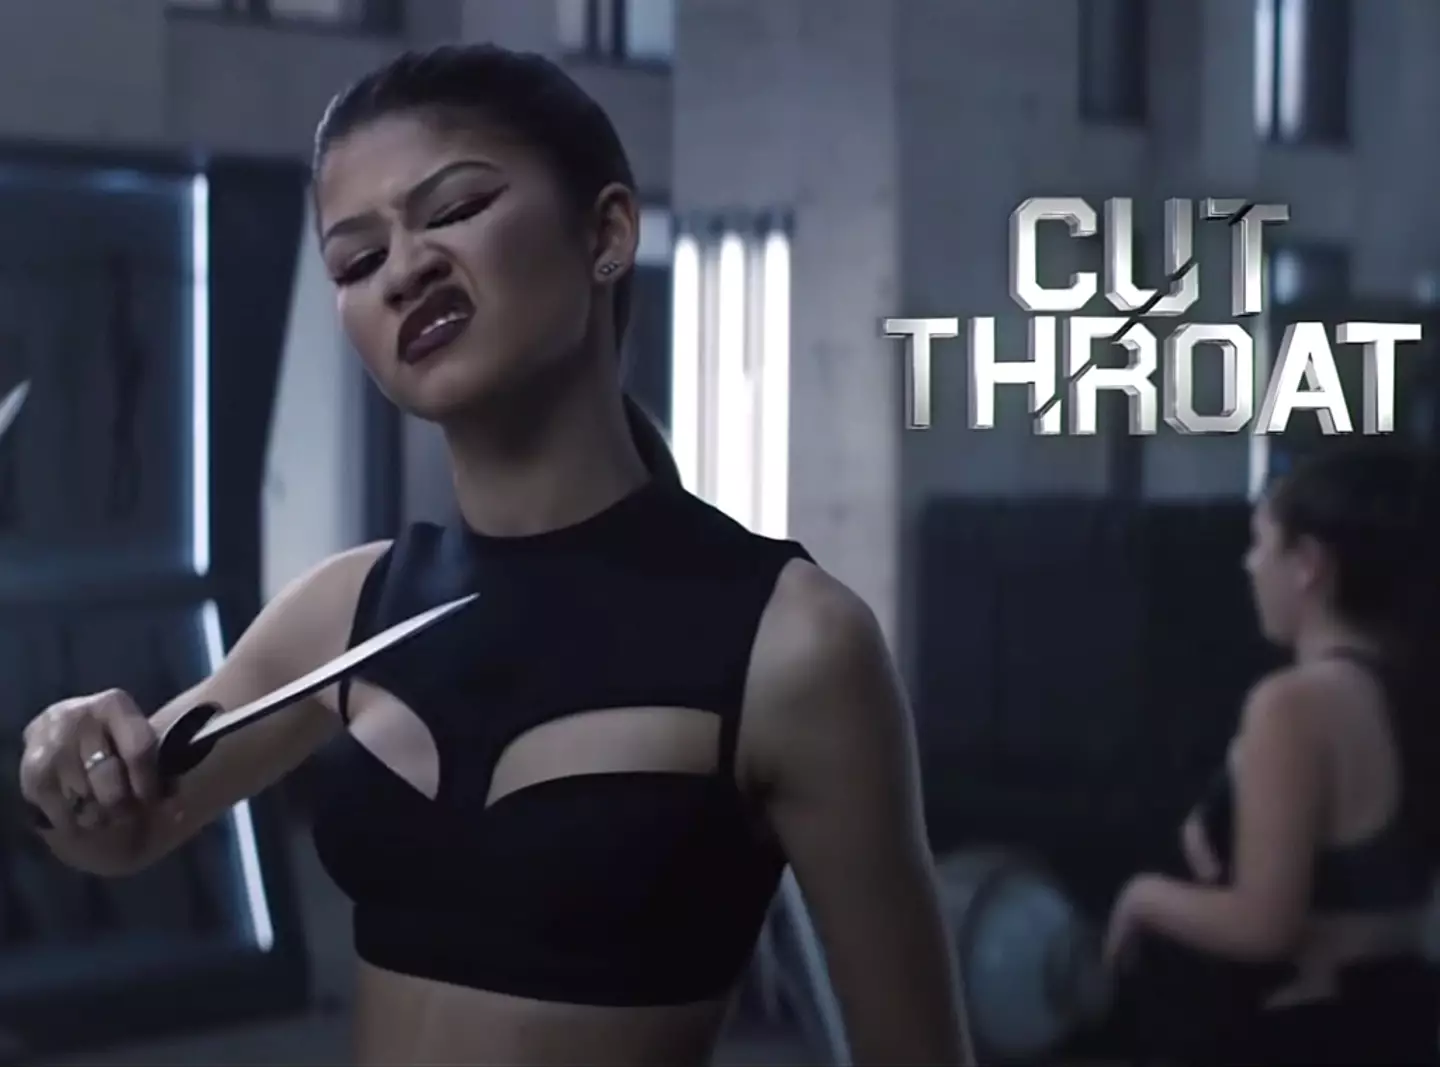 Zendaya had a cameo in Taylor Swift's Bad Blood music video (